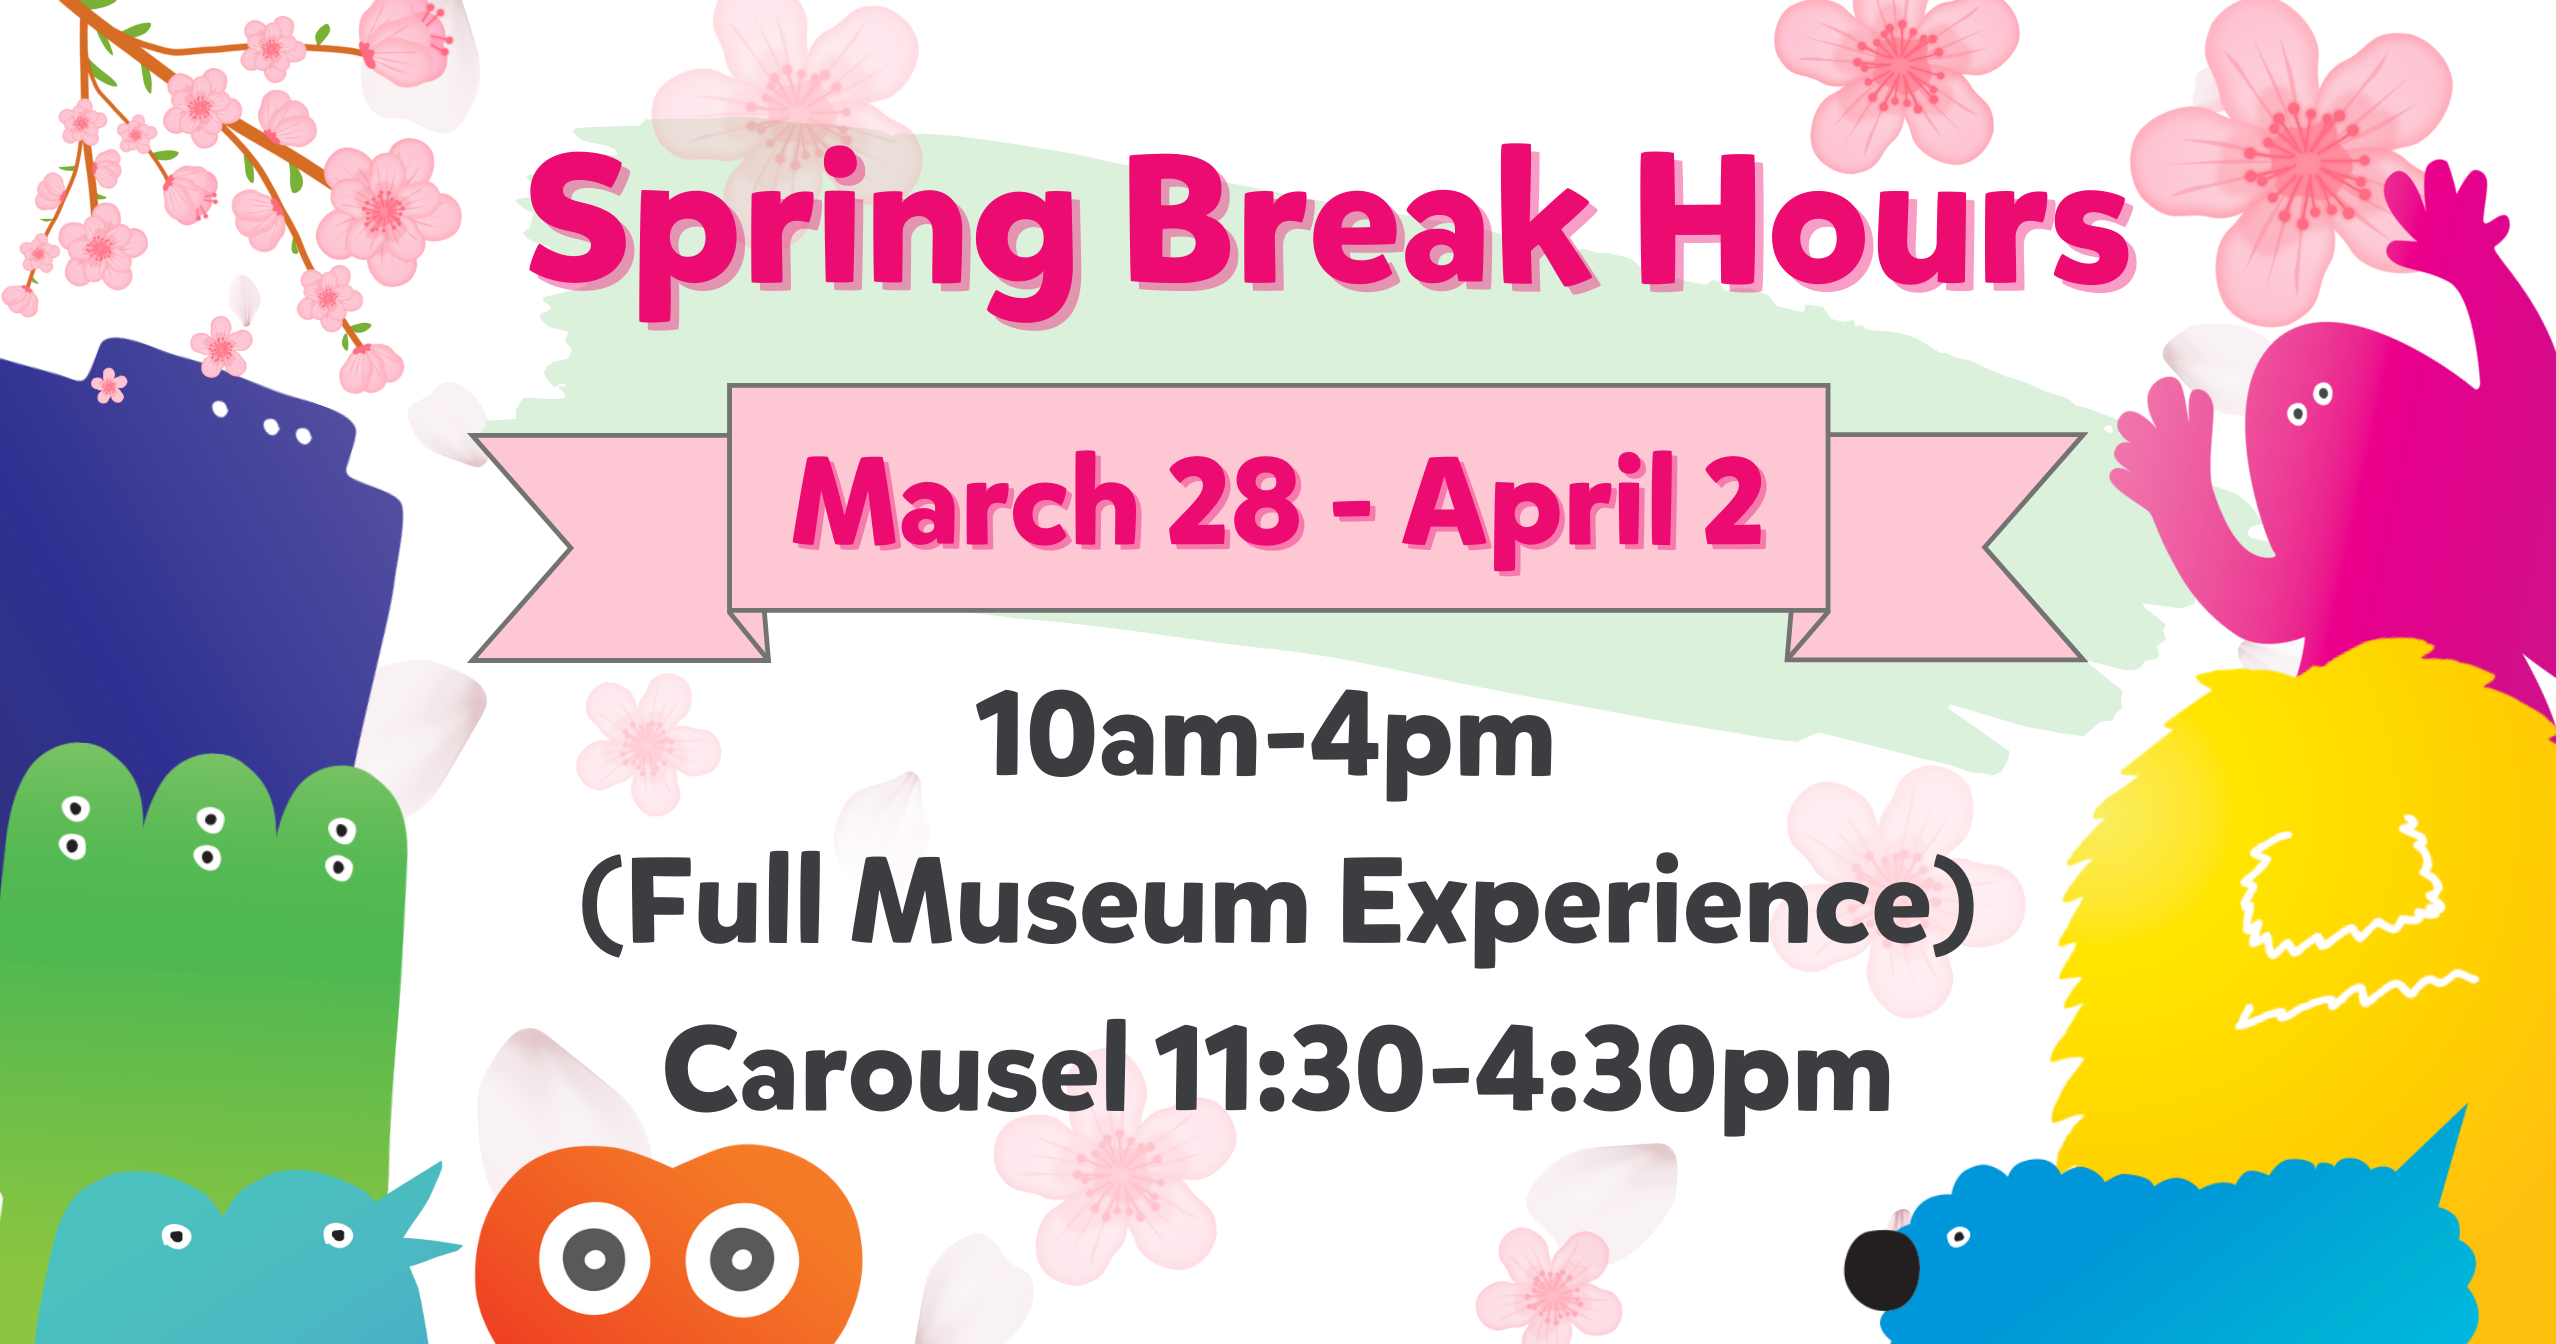 Spring break March hours for Children's Creativity Museum from March 28th to April 2nd from 10am to 4pm